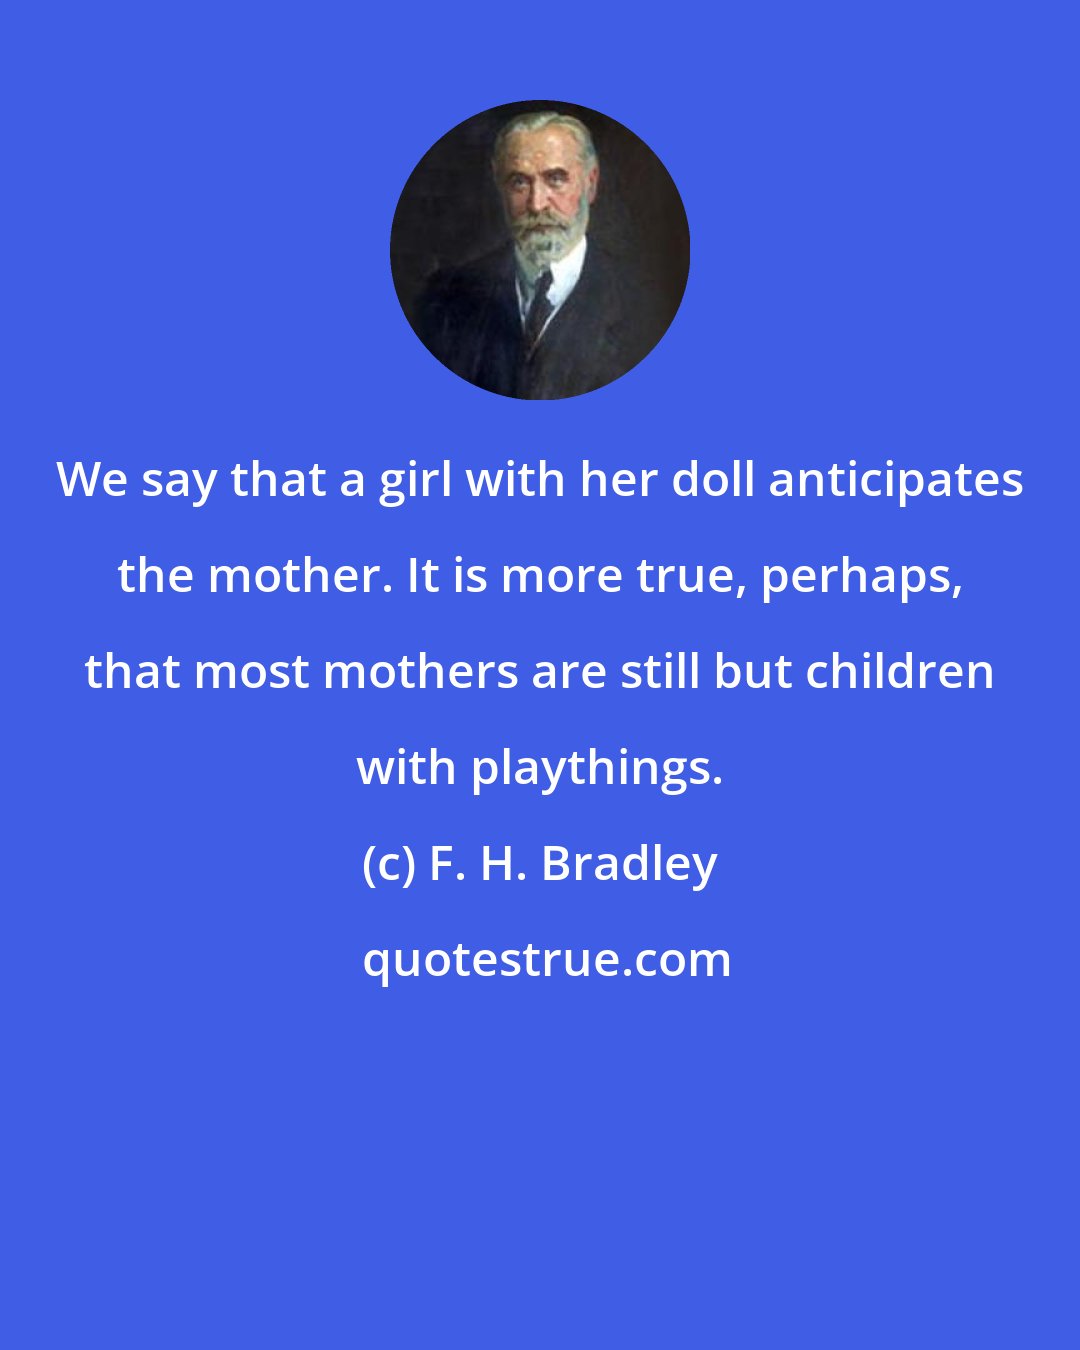 F. H. Bradley: We say that a girl with her doll anticipates the mother. It is more true, perhaps, that most mothers are still but children with playthings.